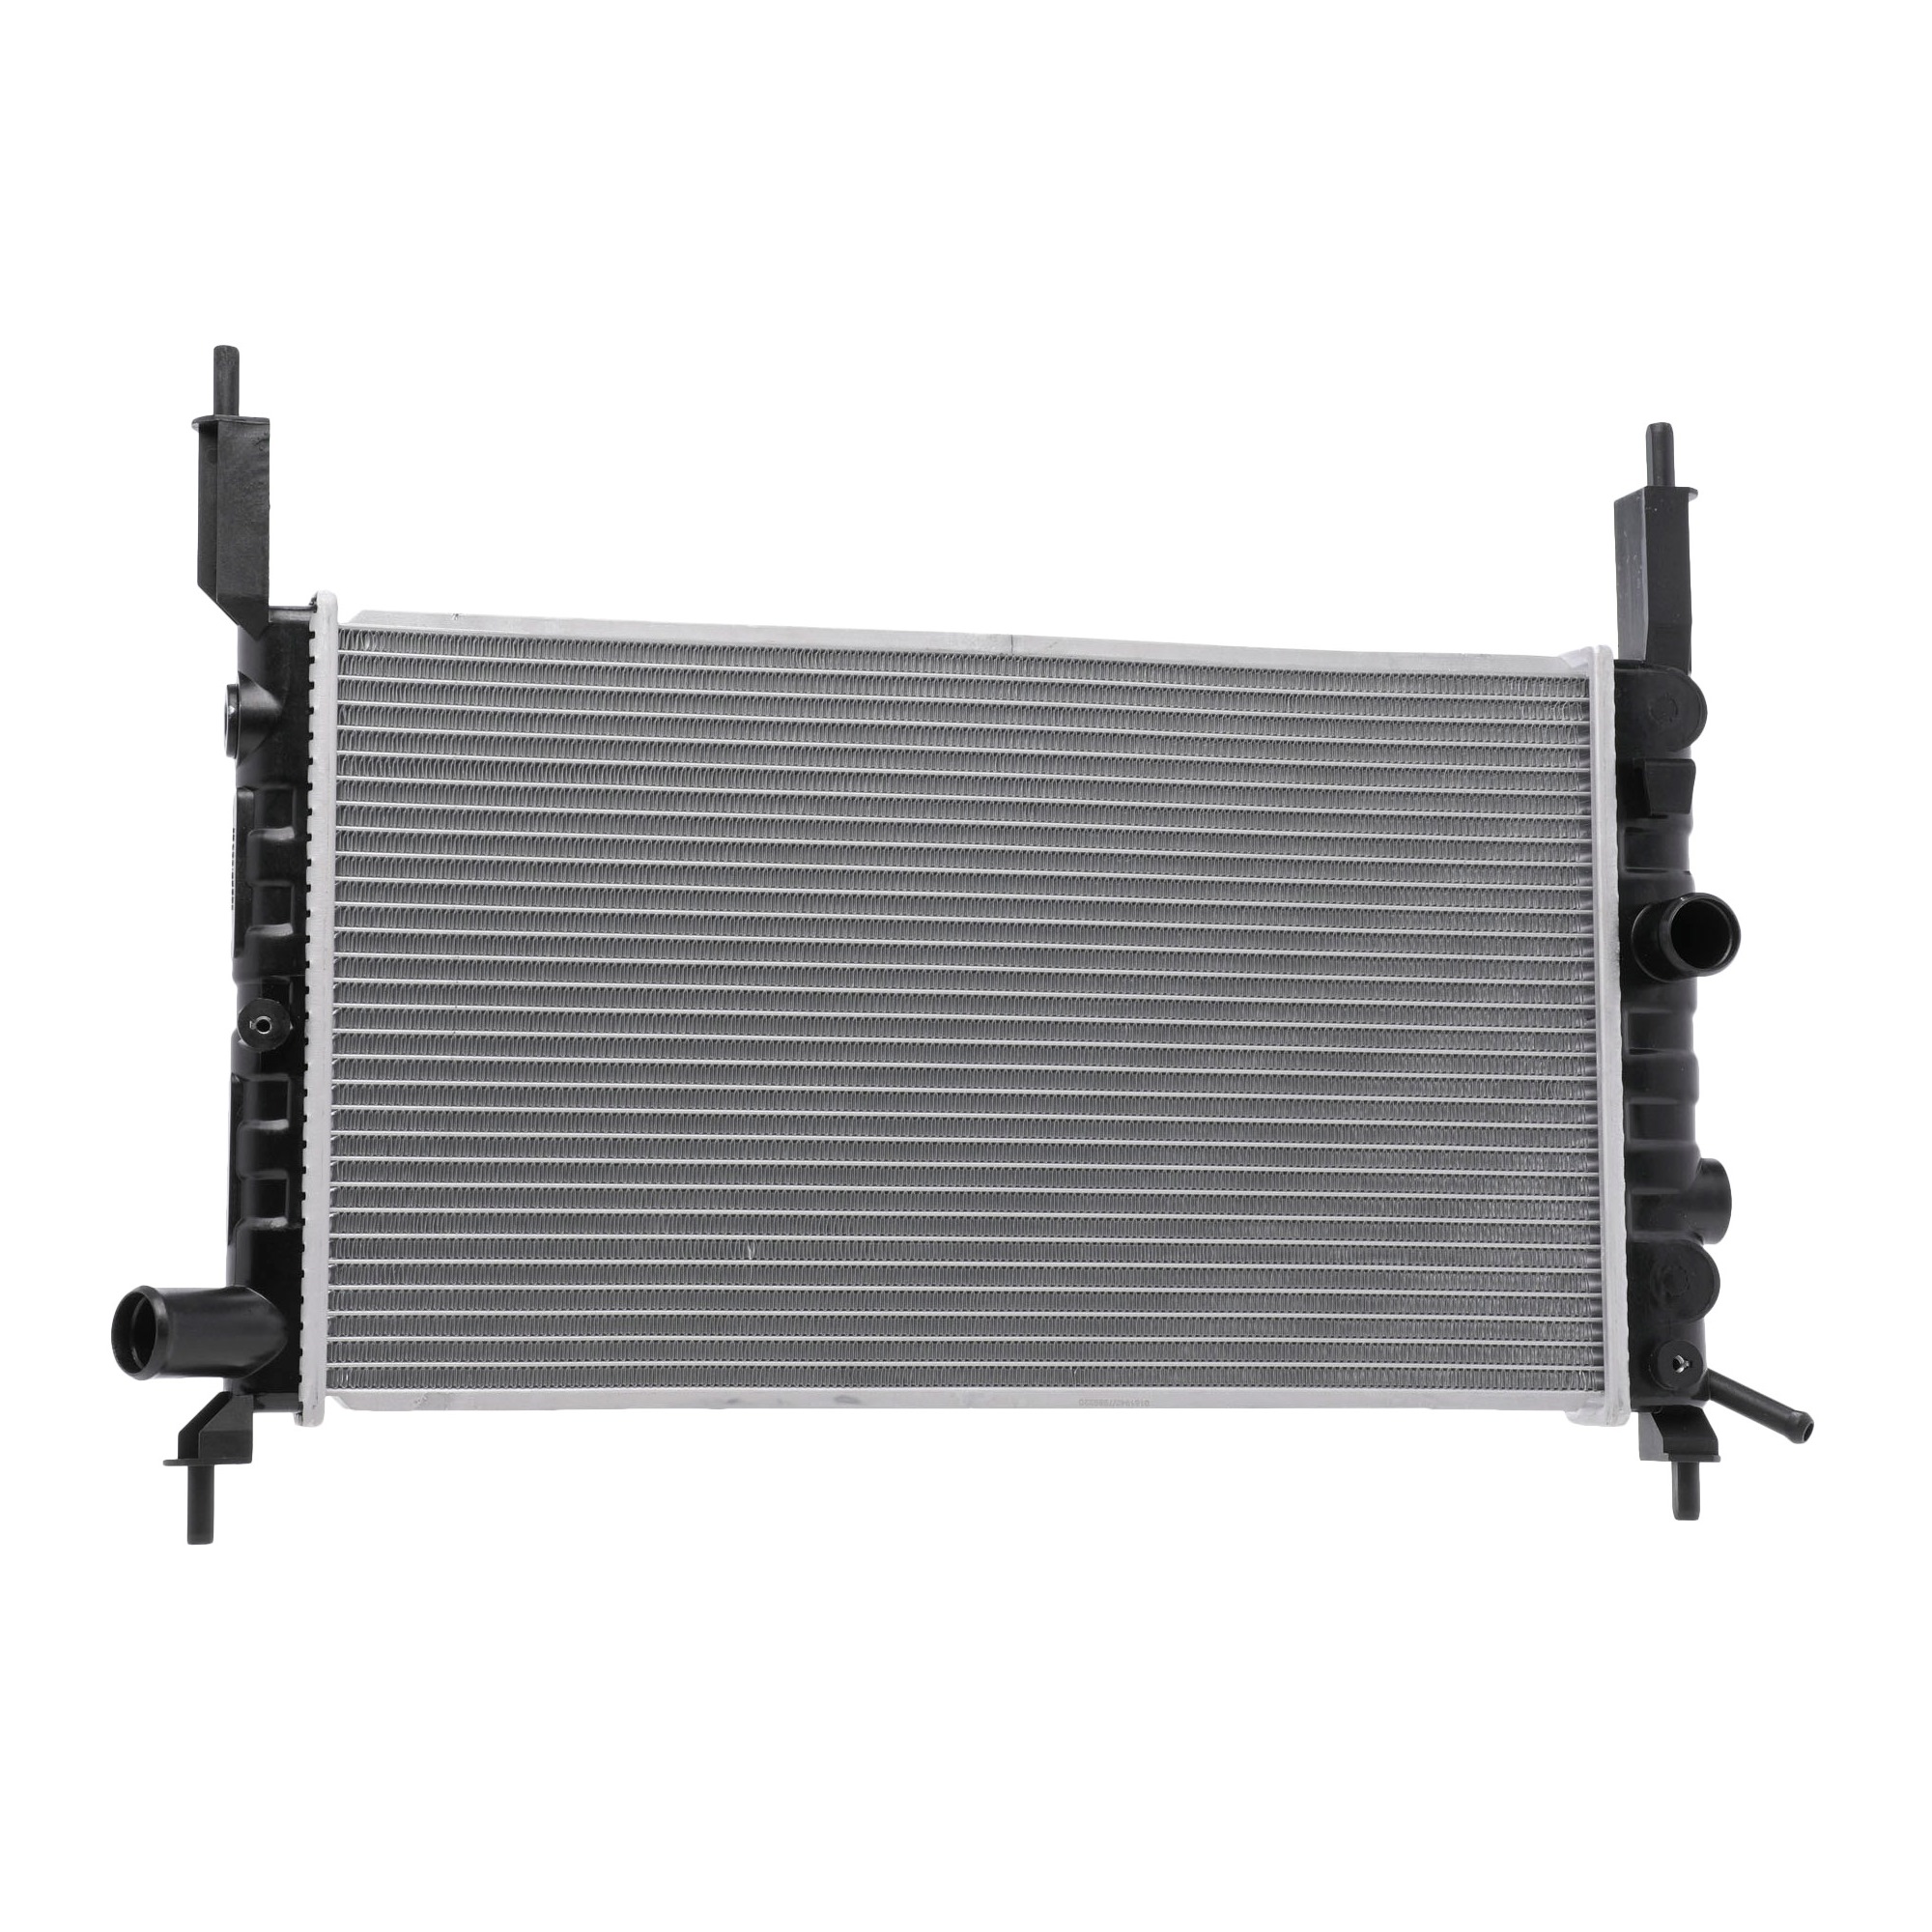 STARK SKRD-0120192 Engine radiator Aluminium, Plastic, for vehicles without air conditioning, Manual Transmission